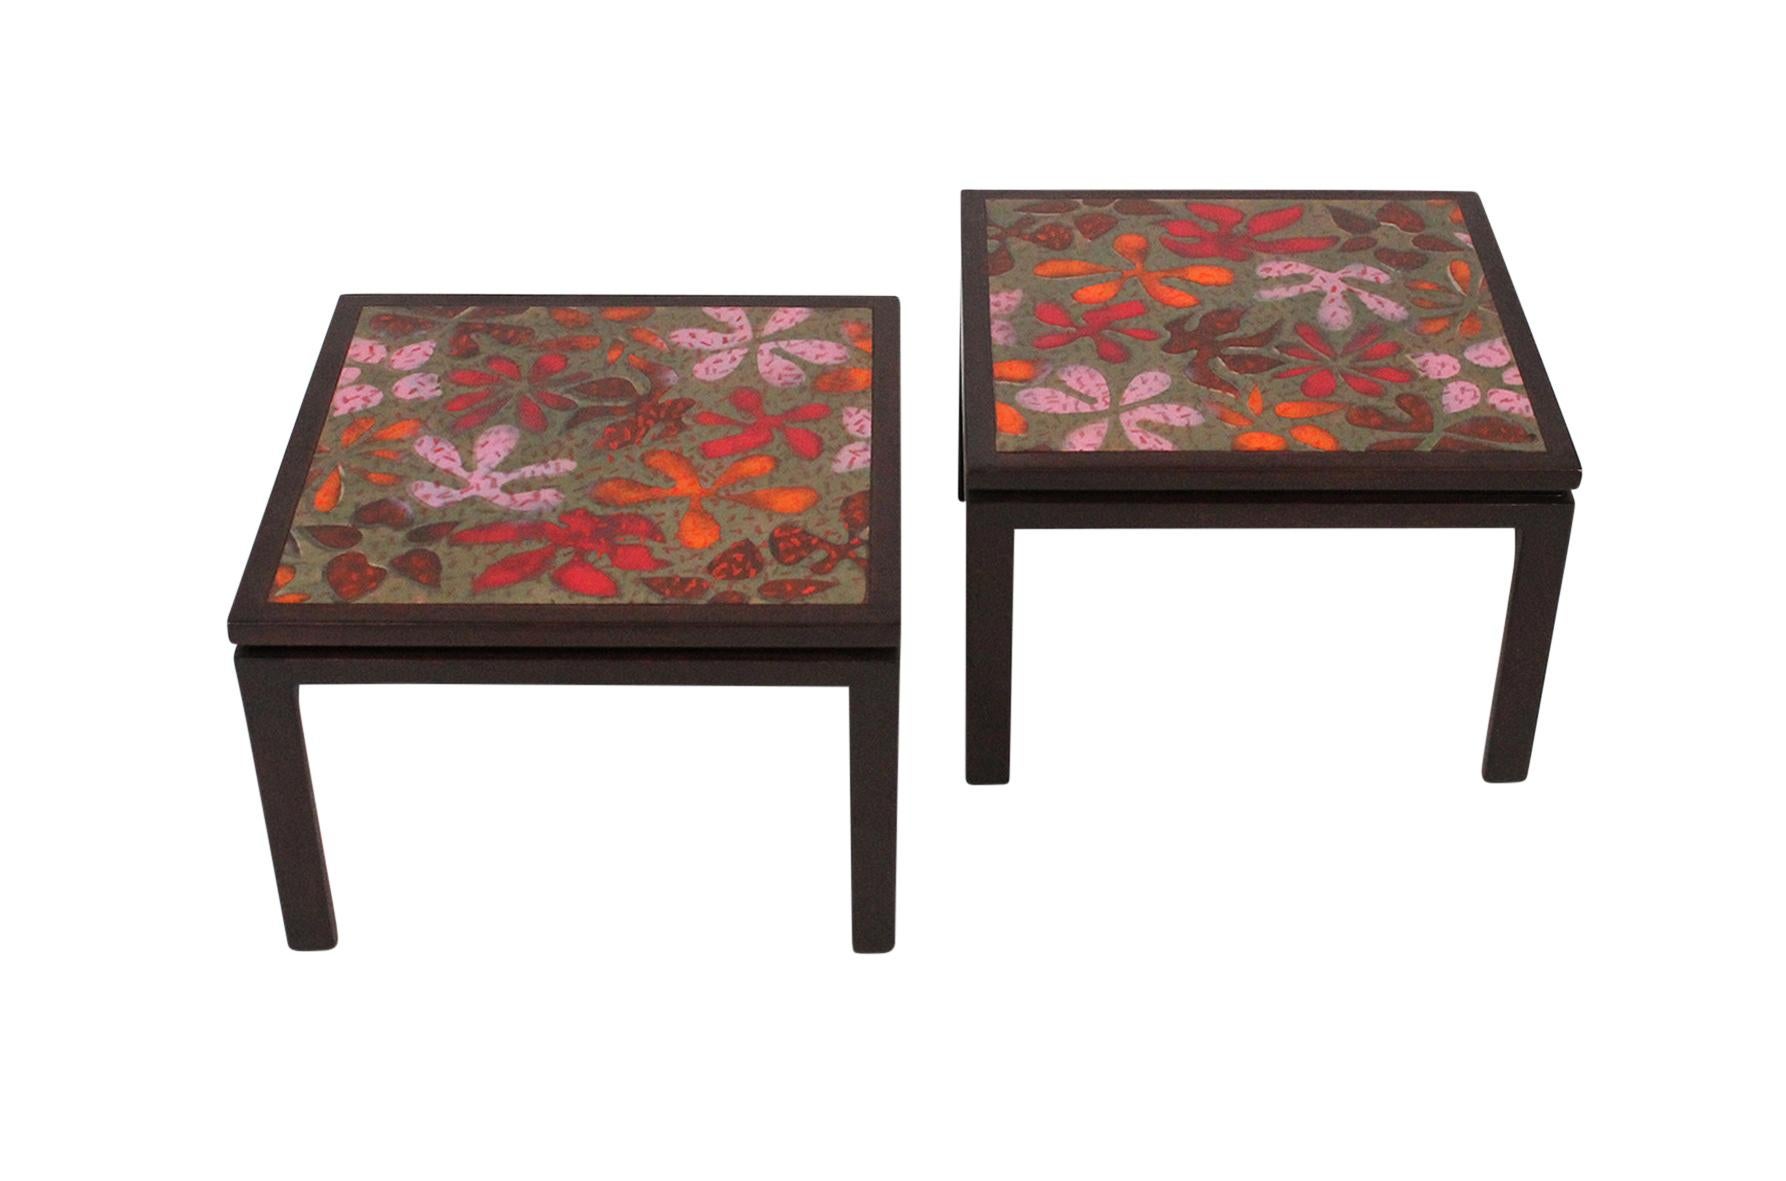 Pair of Harvey Probber side tables with enameled copper tops featuring a floral motif.